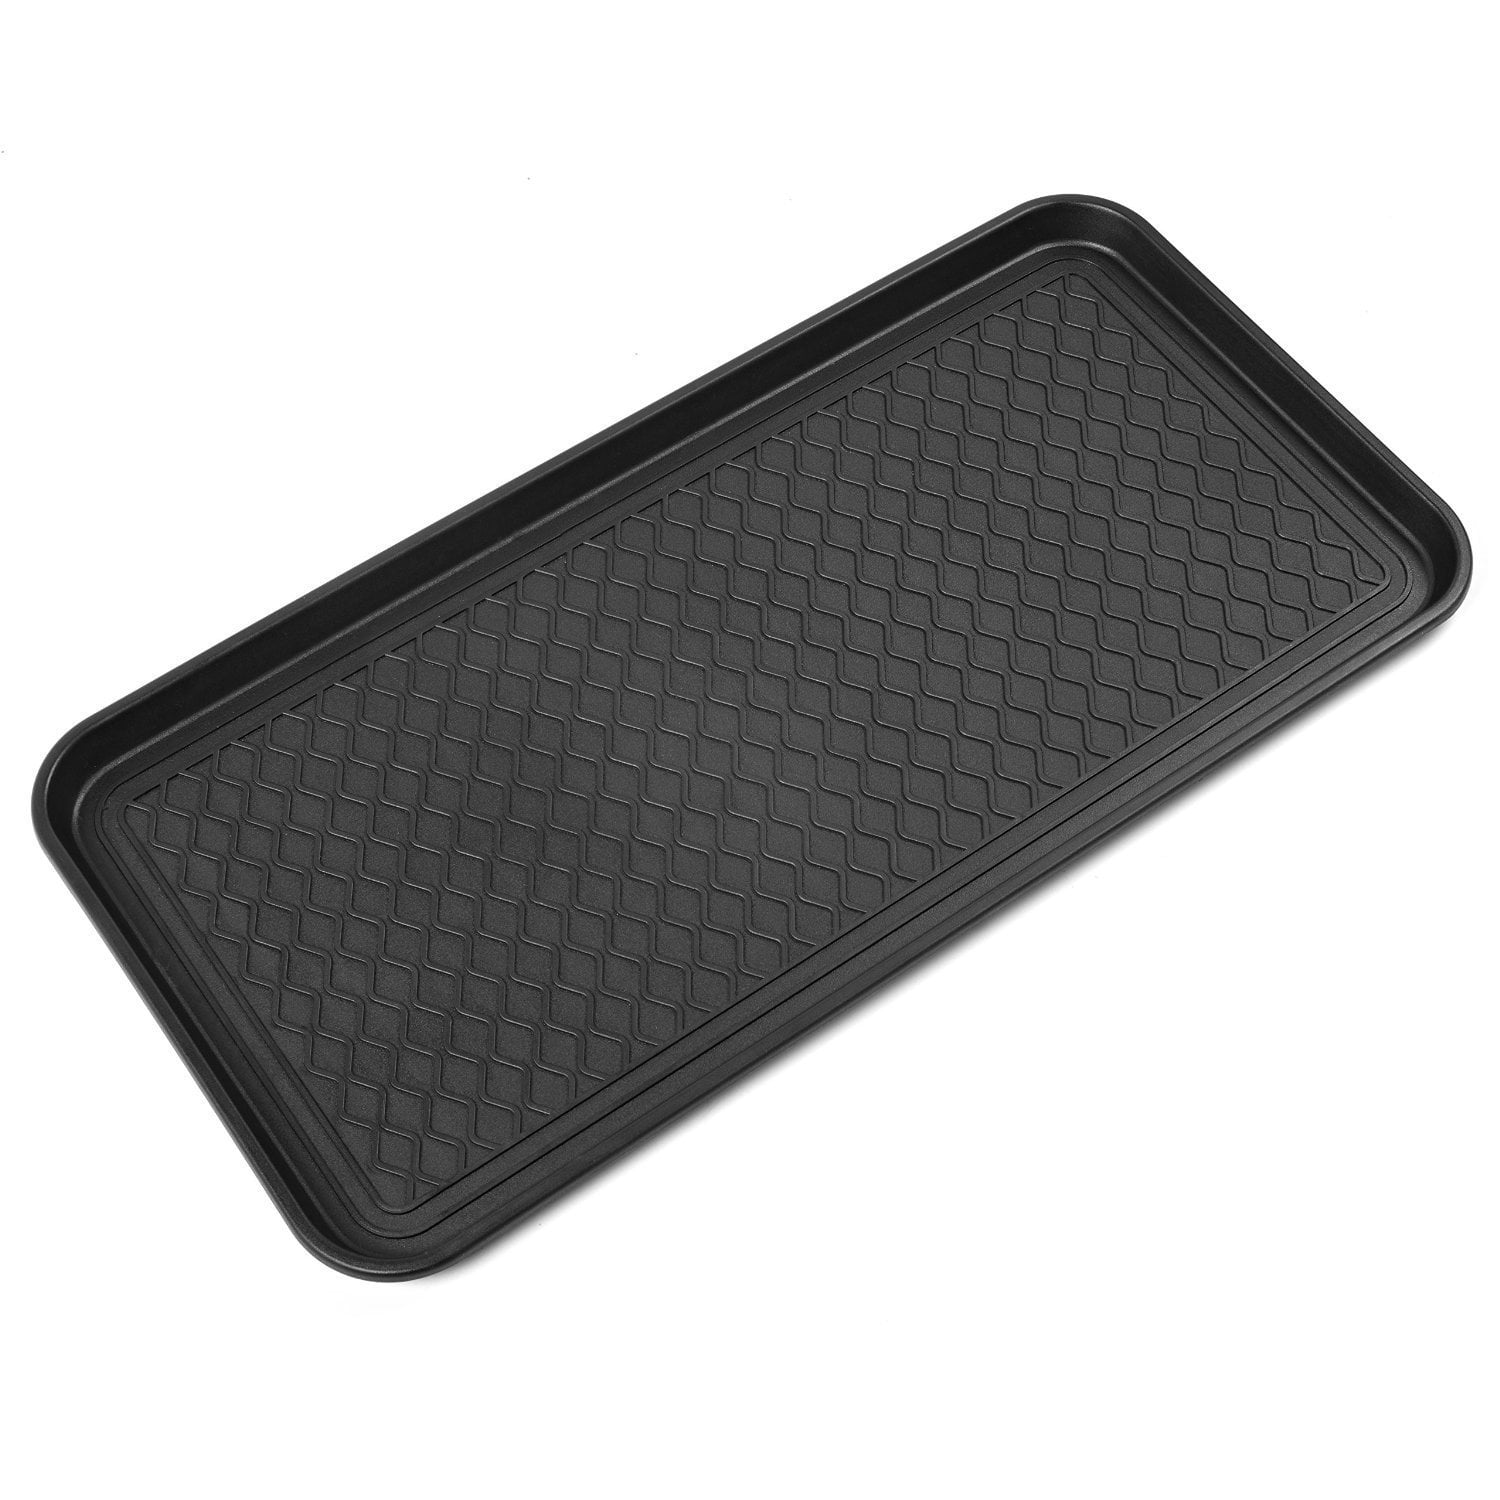 Home-Man Multi-Purpose Boot Tray Mat,Shoe Tray Mat,Pet Bowl Tray,Waterproof  Trays for Indoor and Outdoor Floor Protection,24 x 15/Medium …